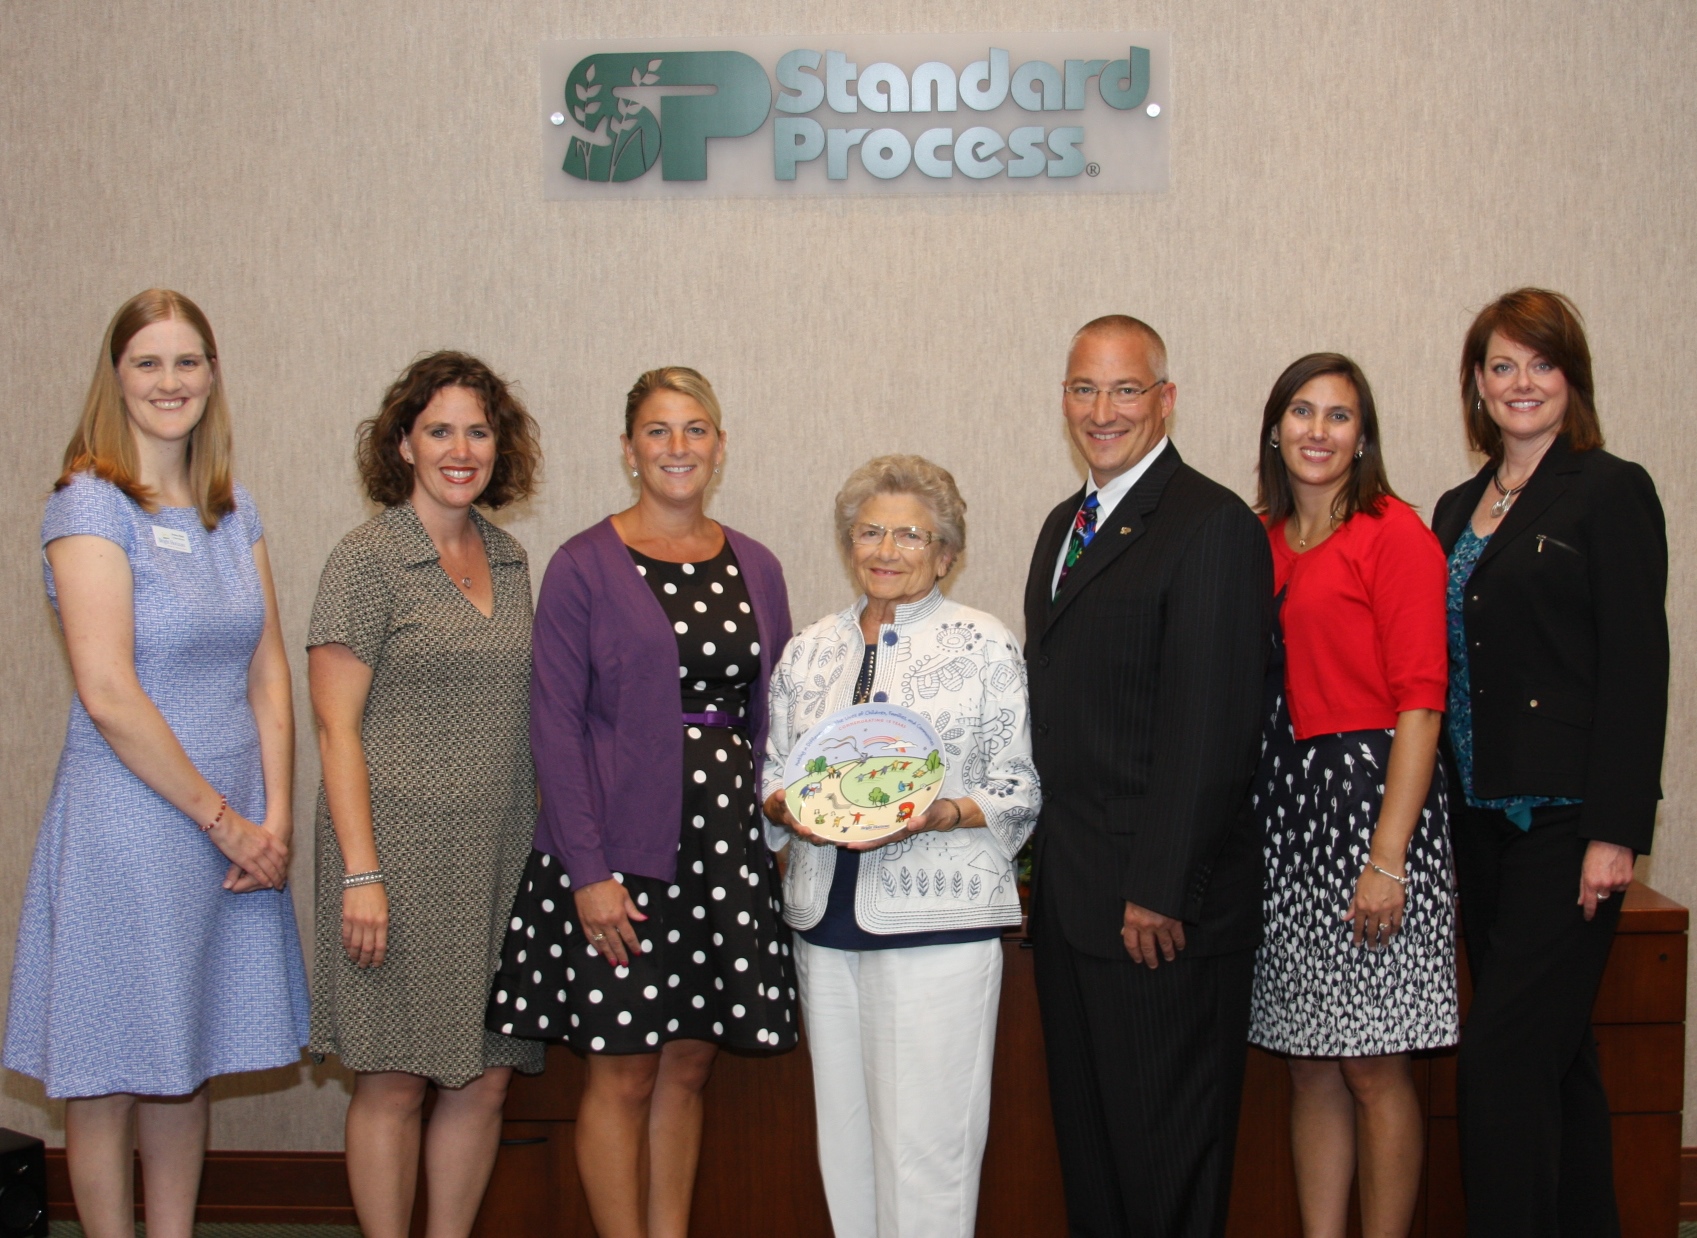 Bright Horizons representatives present a 10-year anniversary plate to Standard Process owners, (center left-right) Mary Wisniewski; Sylvia DuBois; Charles C. DuBois.